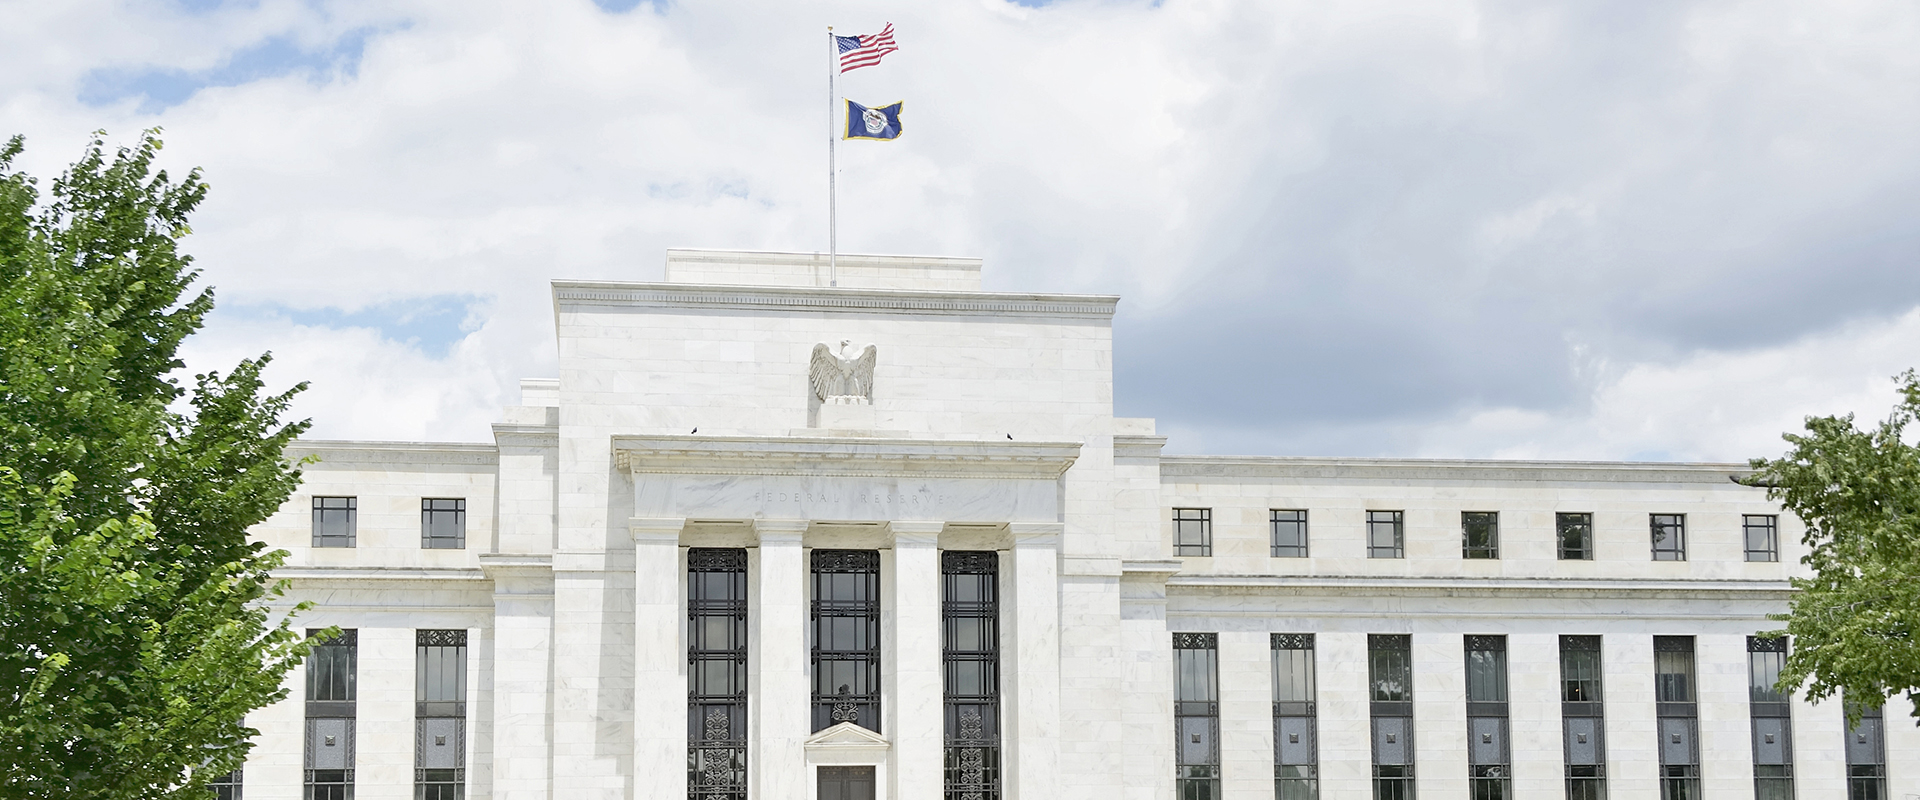 FOMC: Tapering could begin this year and end by mid-2022